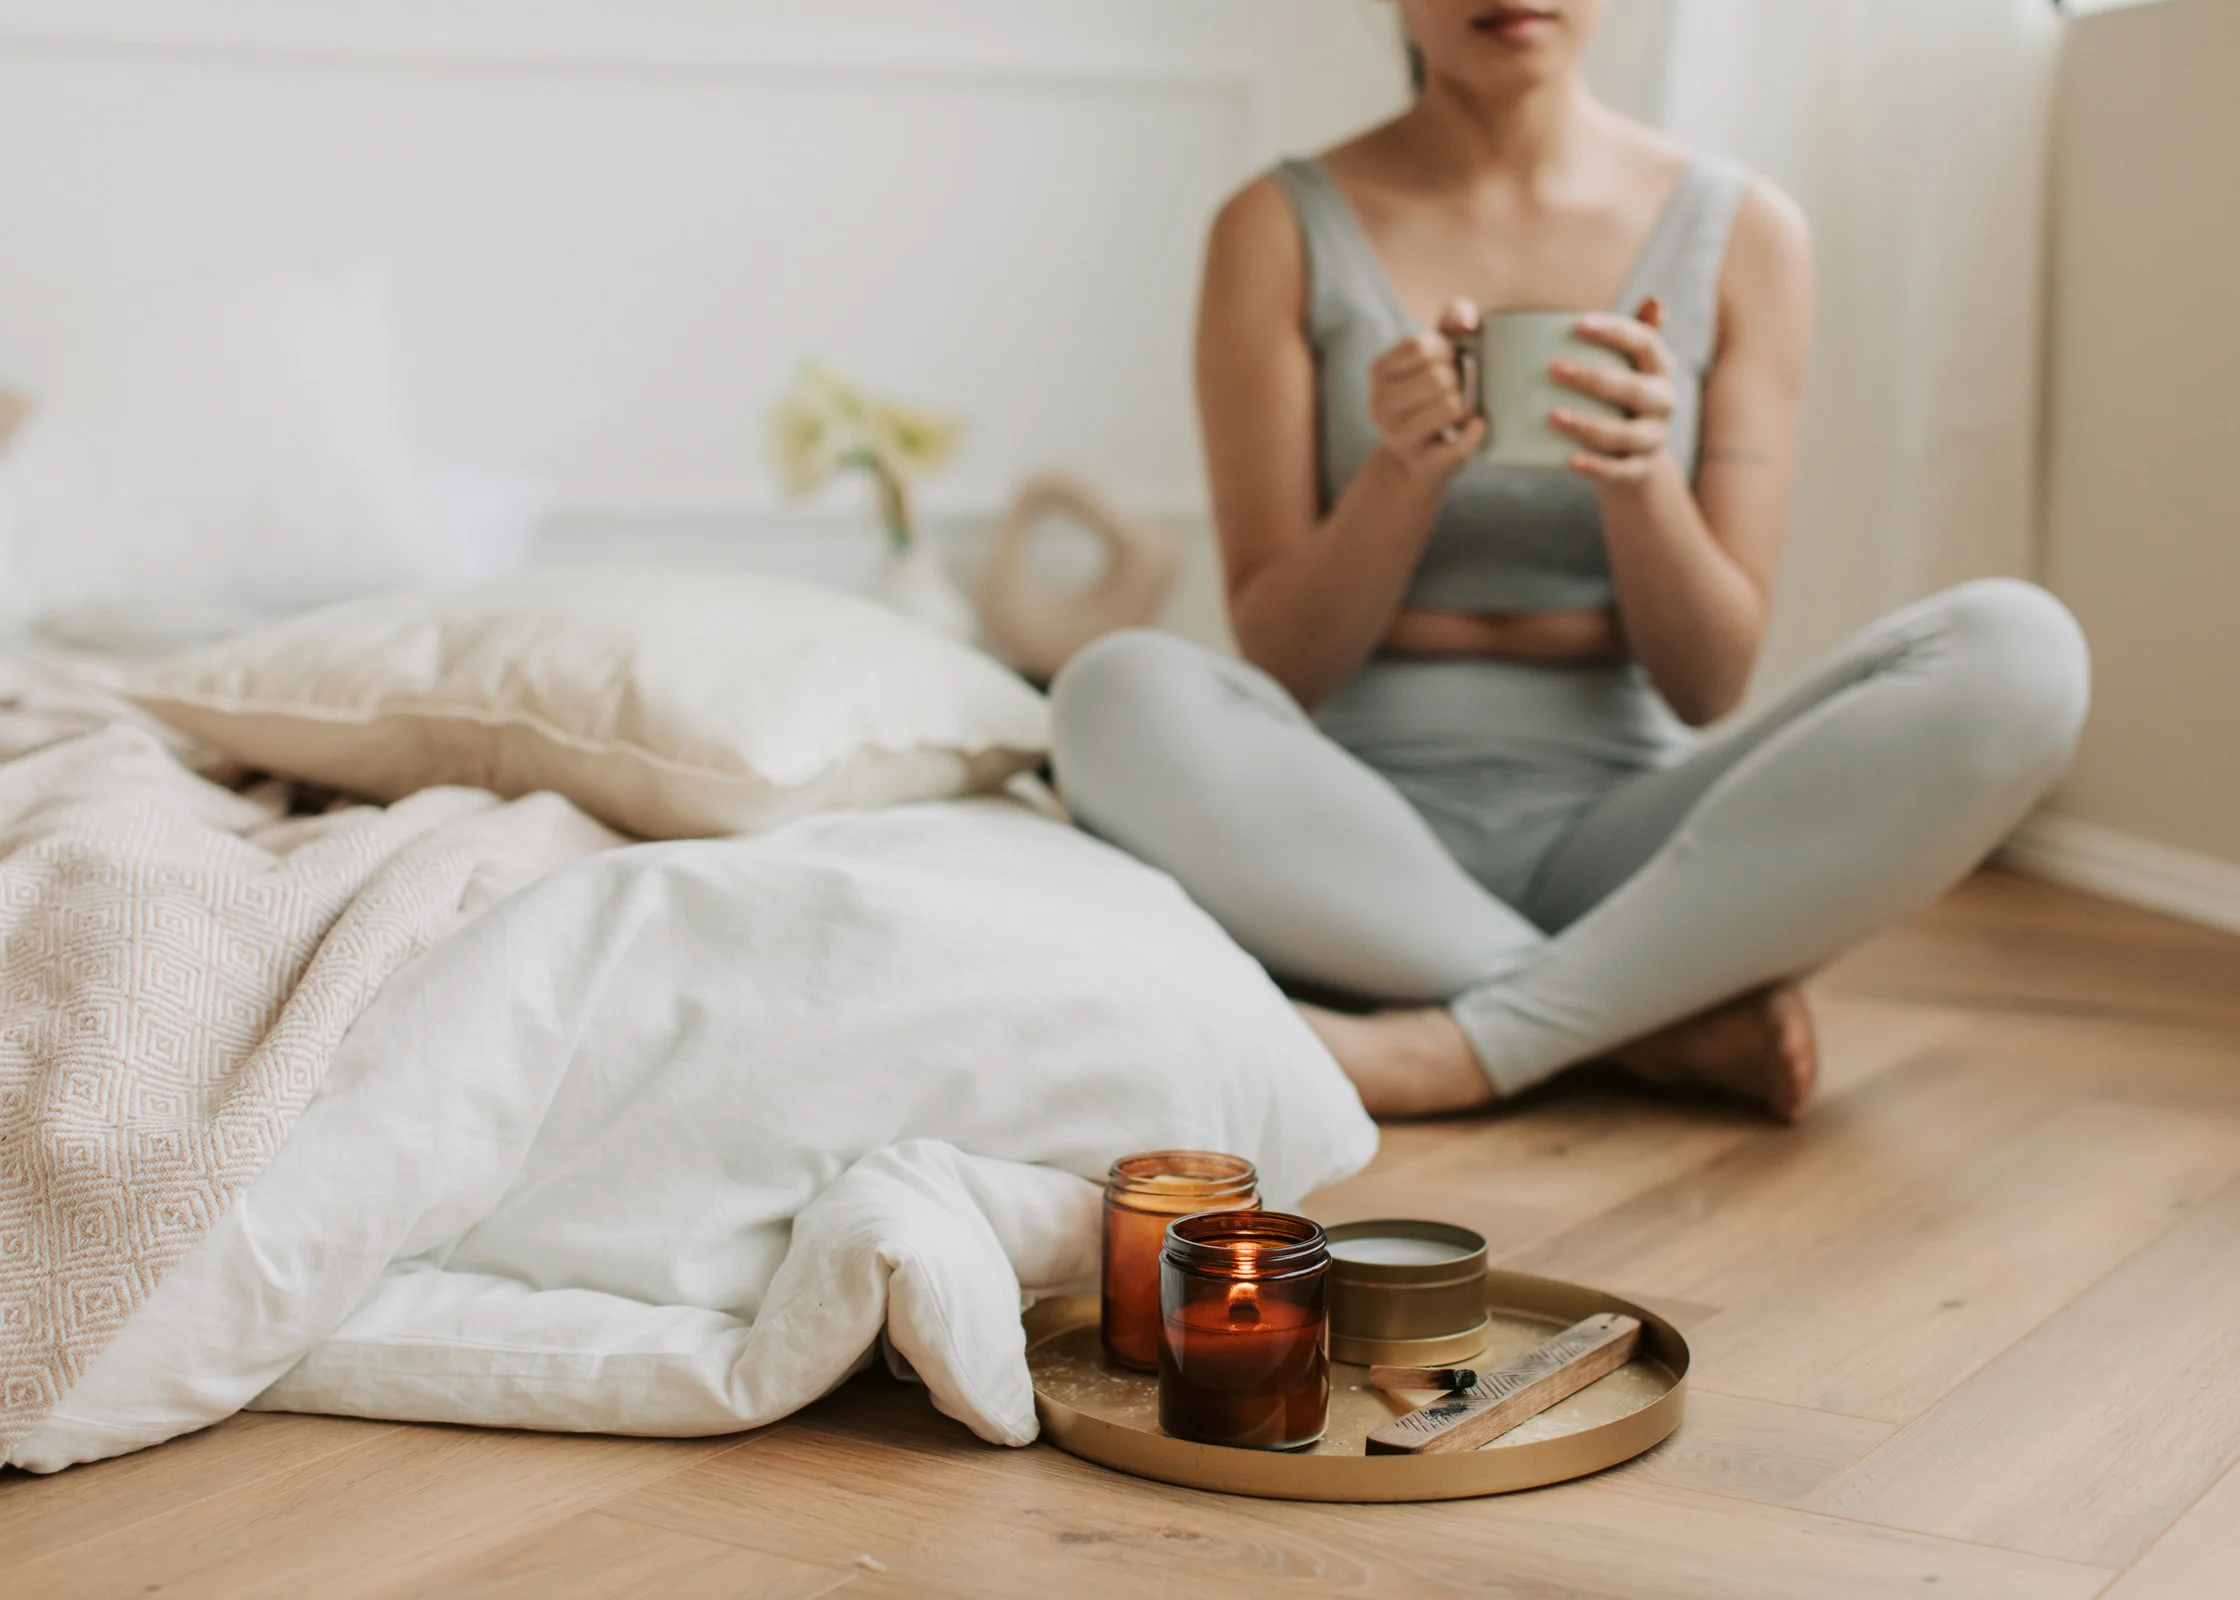 woman in a cozy room. relax after a long, hard, stressful day at work or at home. Ways to unwind and decompress after a busy day and relieve stress.